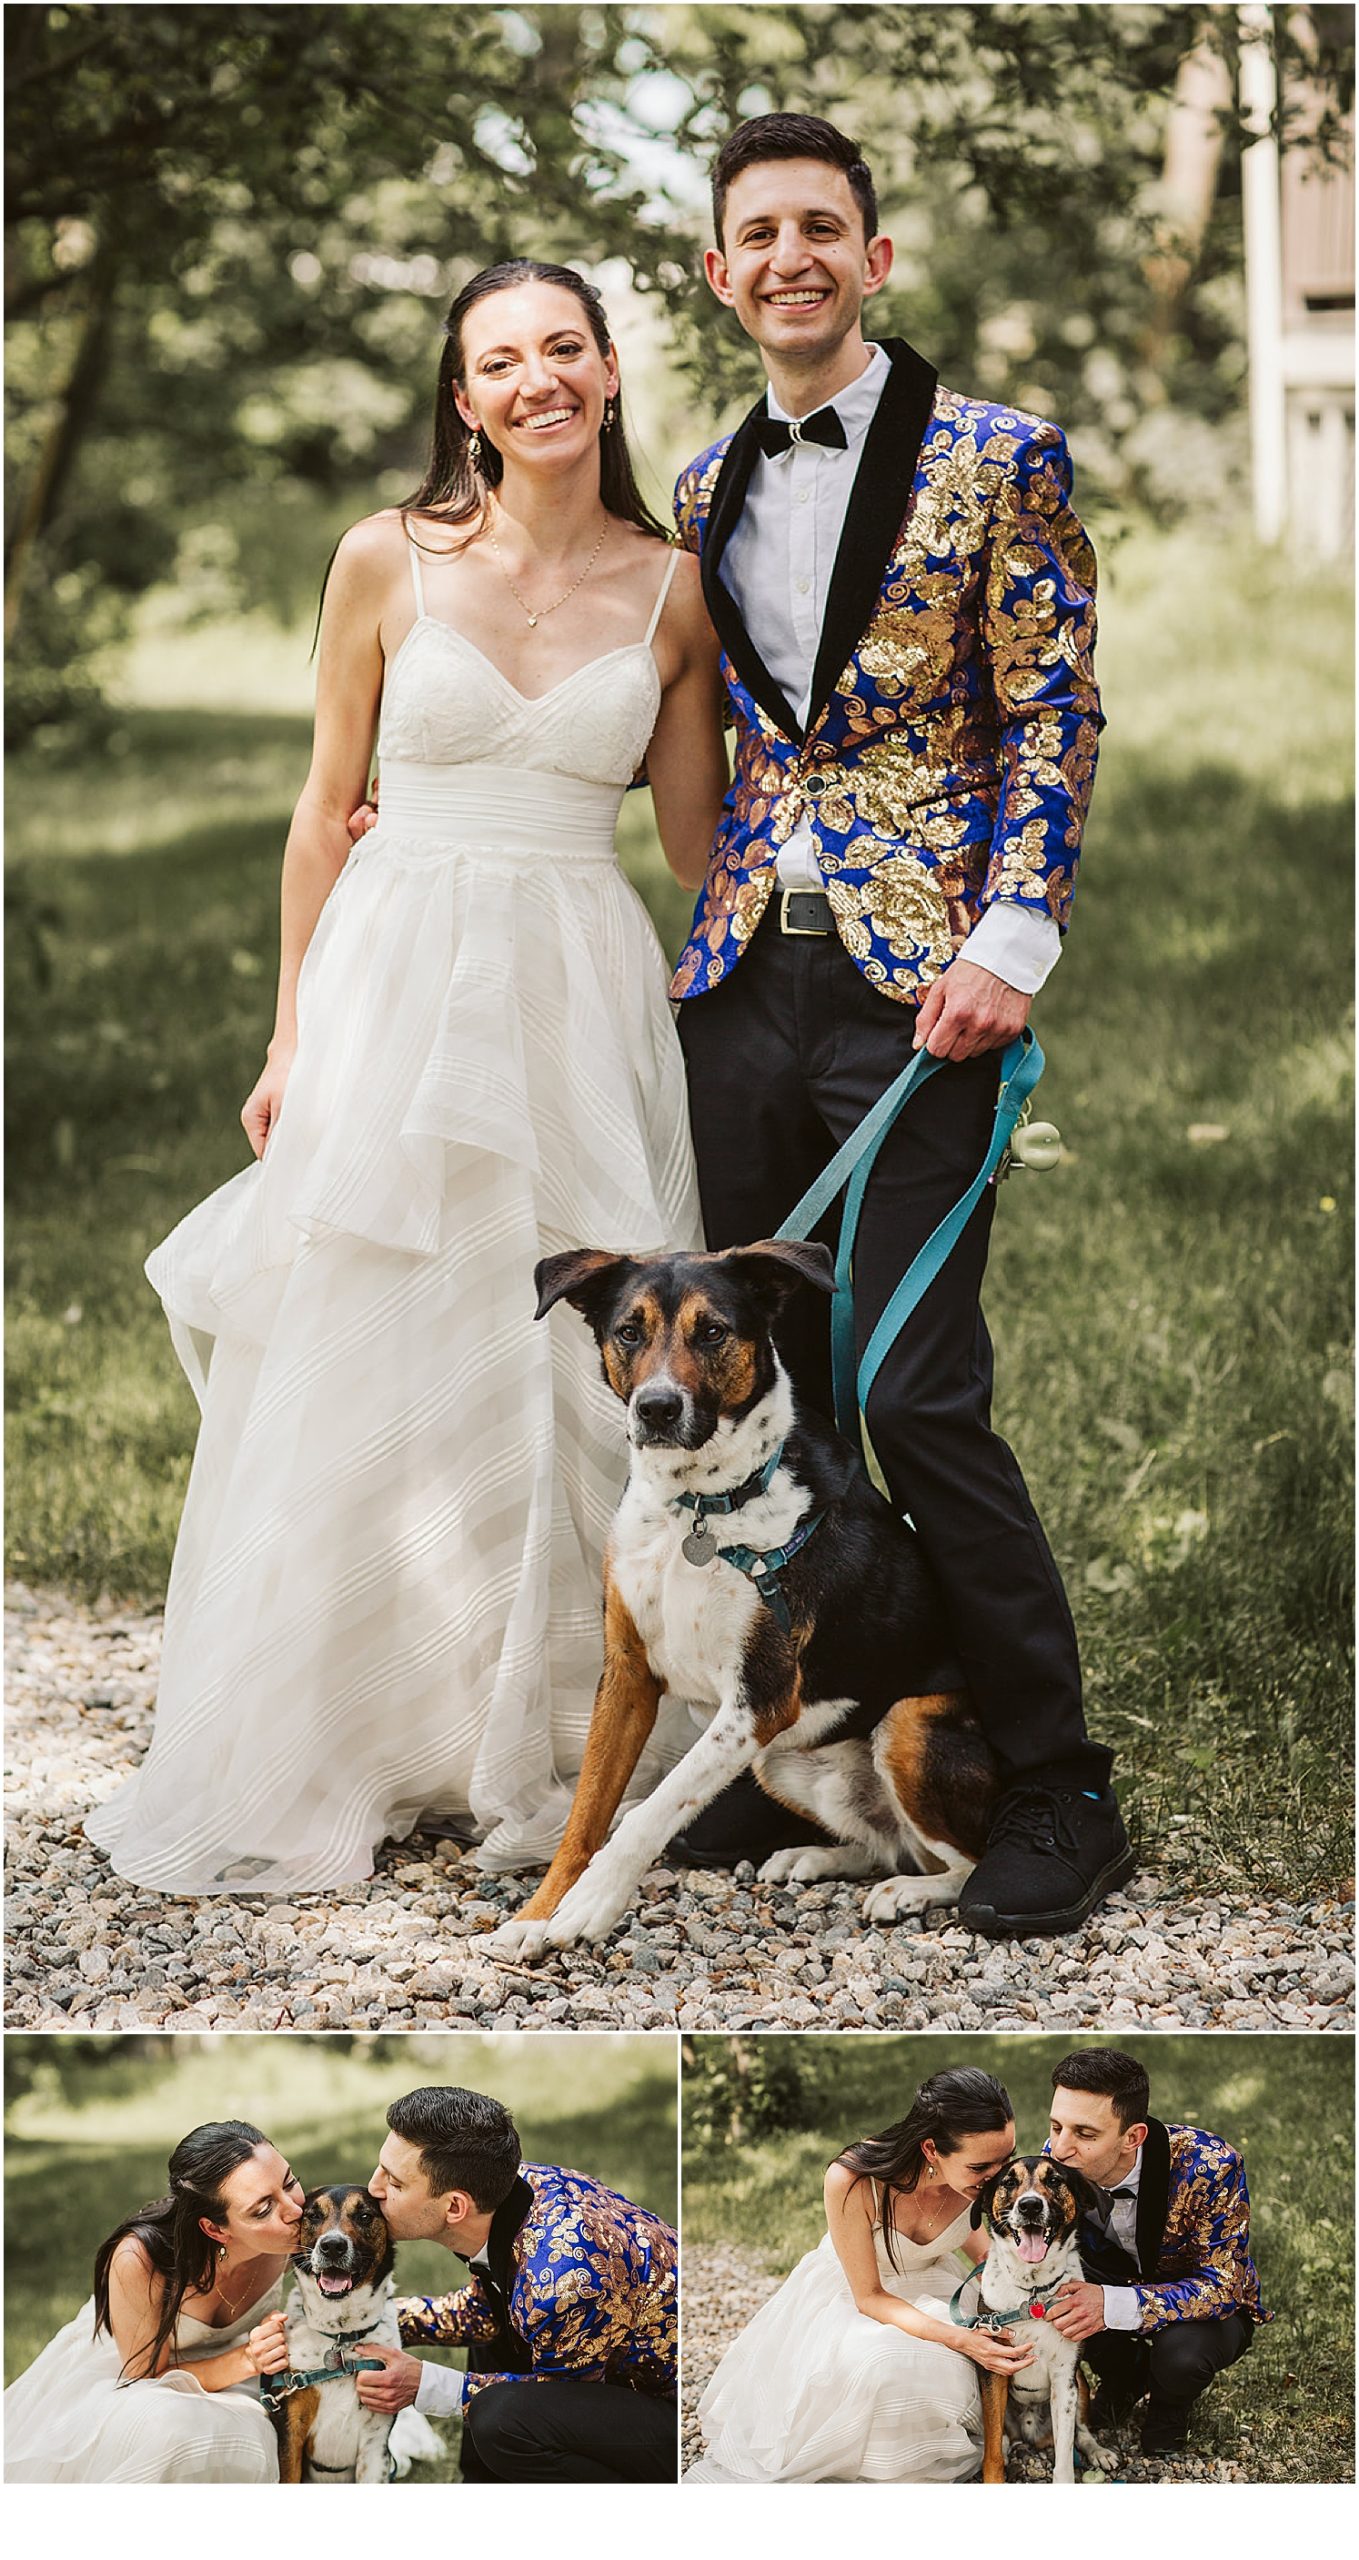 Couple poses for wedding portraits with dog at their Nahant wedding